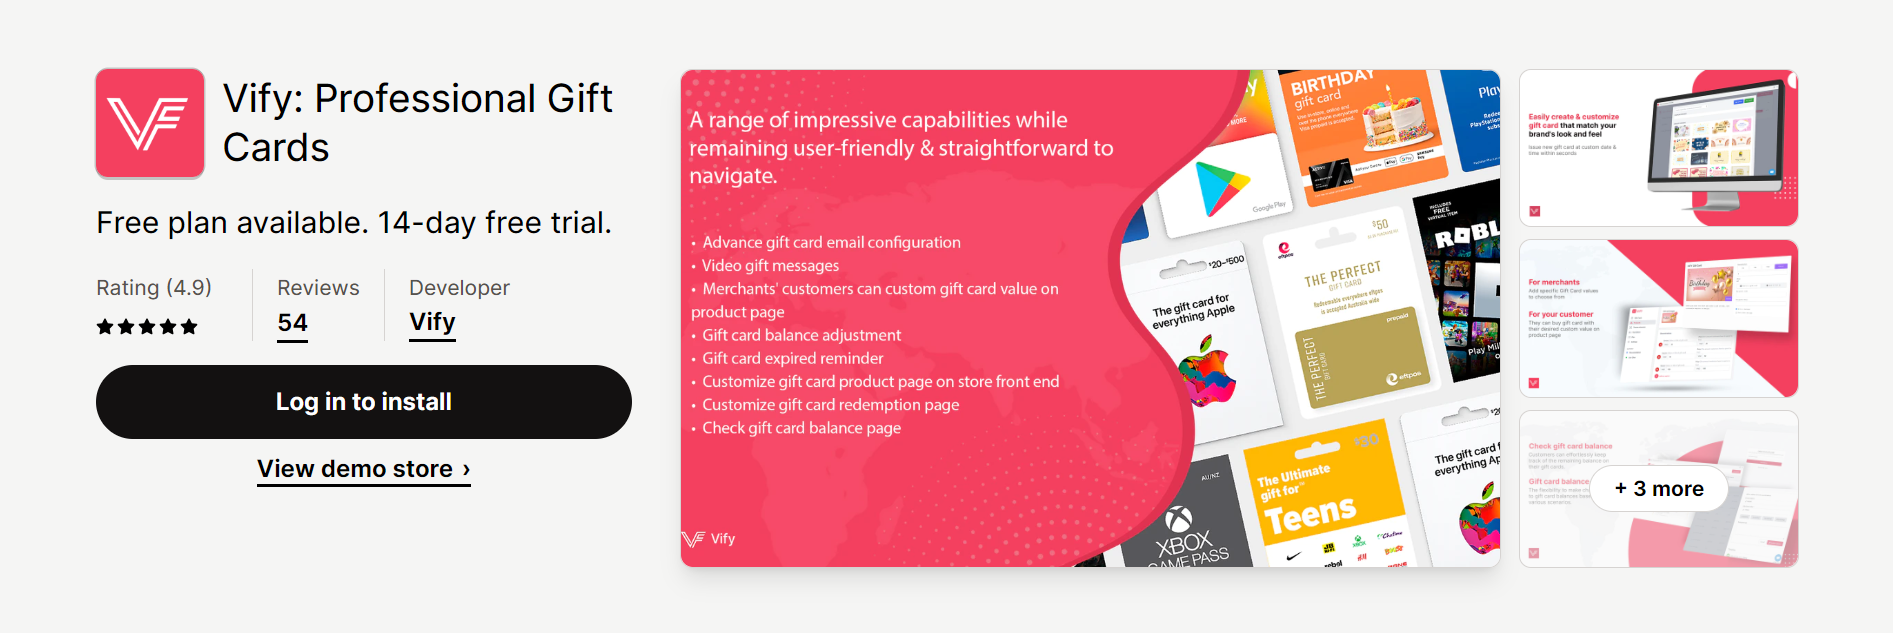 Vify: Professional Gift Cards